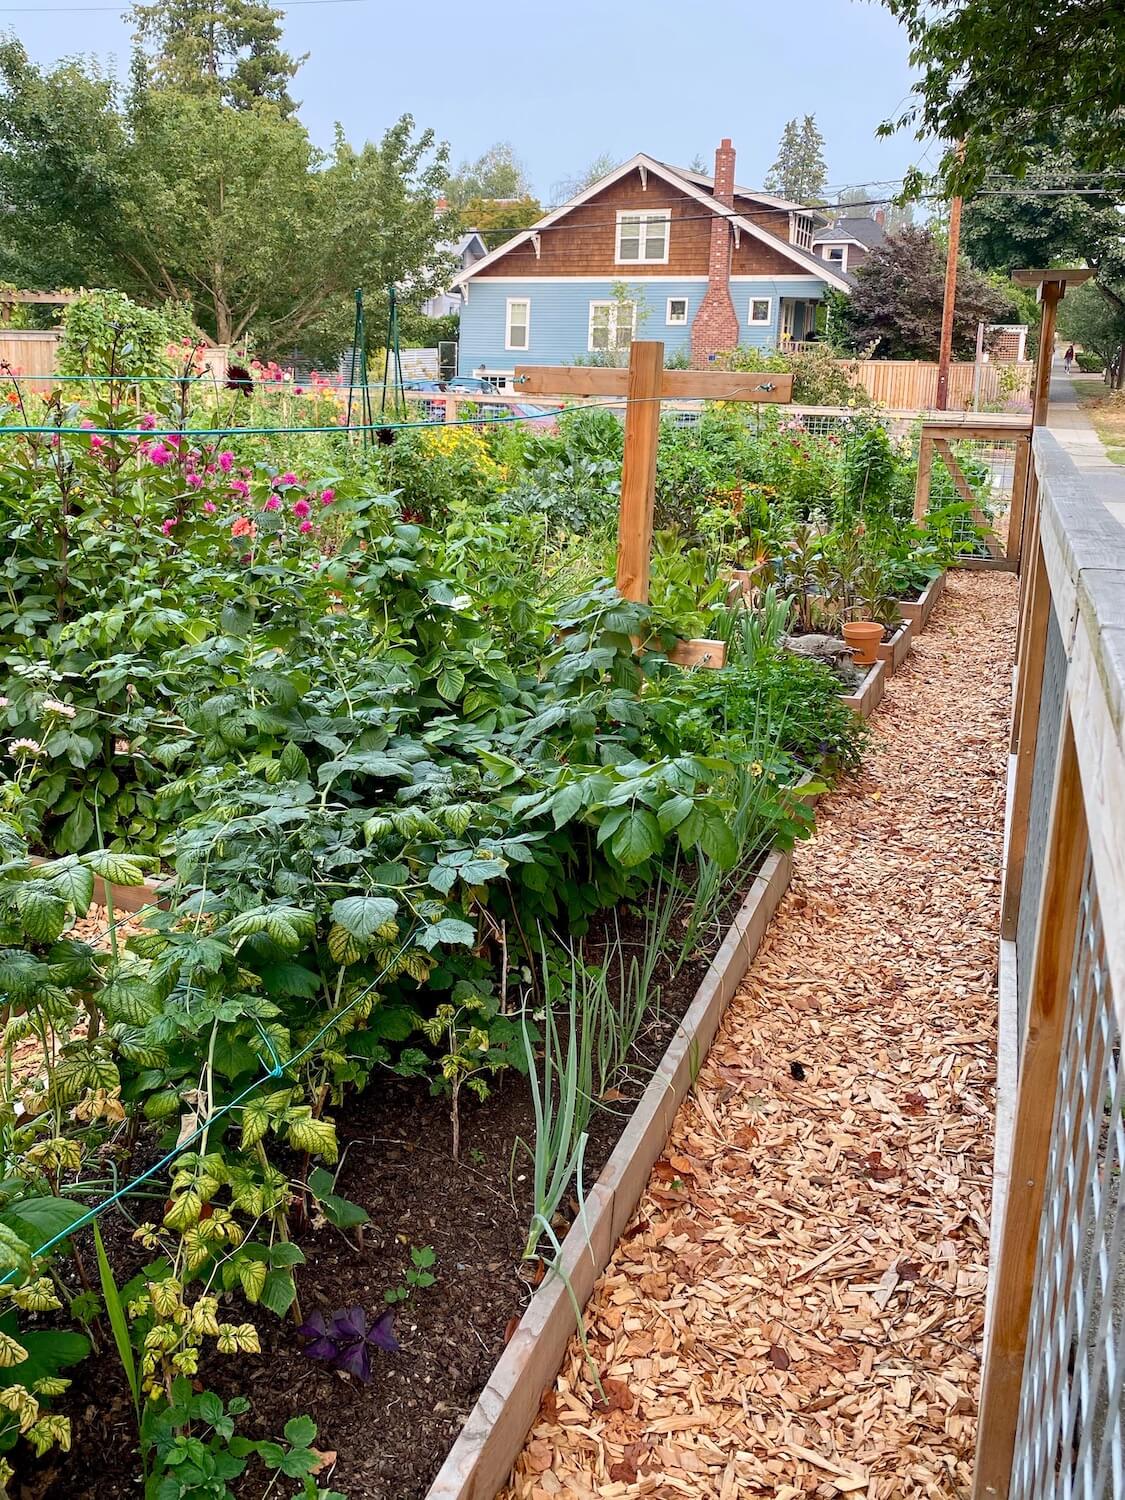 A photo of a Seattle P-Patch garden. The fence containing all the raised planter boxes is made of metal grating and cedar wood while the planter boxes rise up about a foot off the ground and hold a variety of green leafy plants, vegetable, flowers and other forms of life. In the background, across the street is a vintage bungalow home with sky blue siding and a fireplace that heads up to the blue sky.